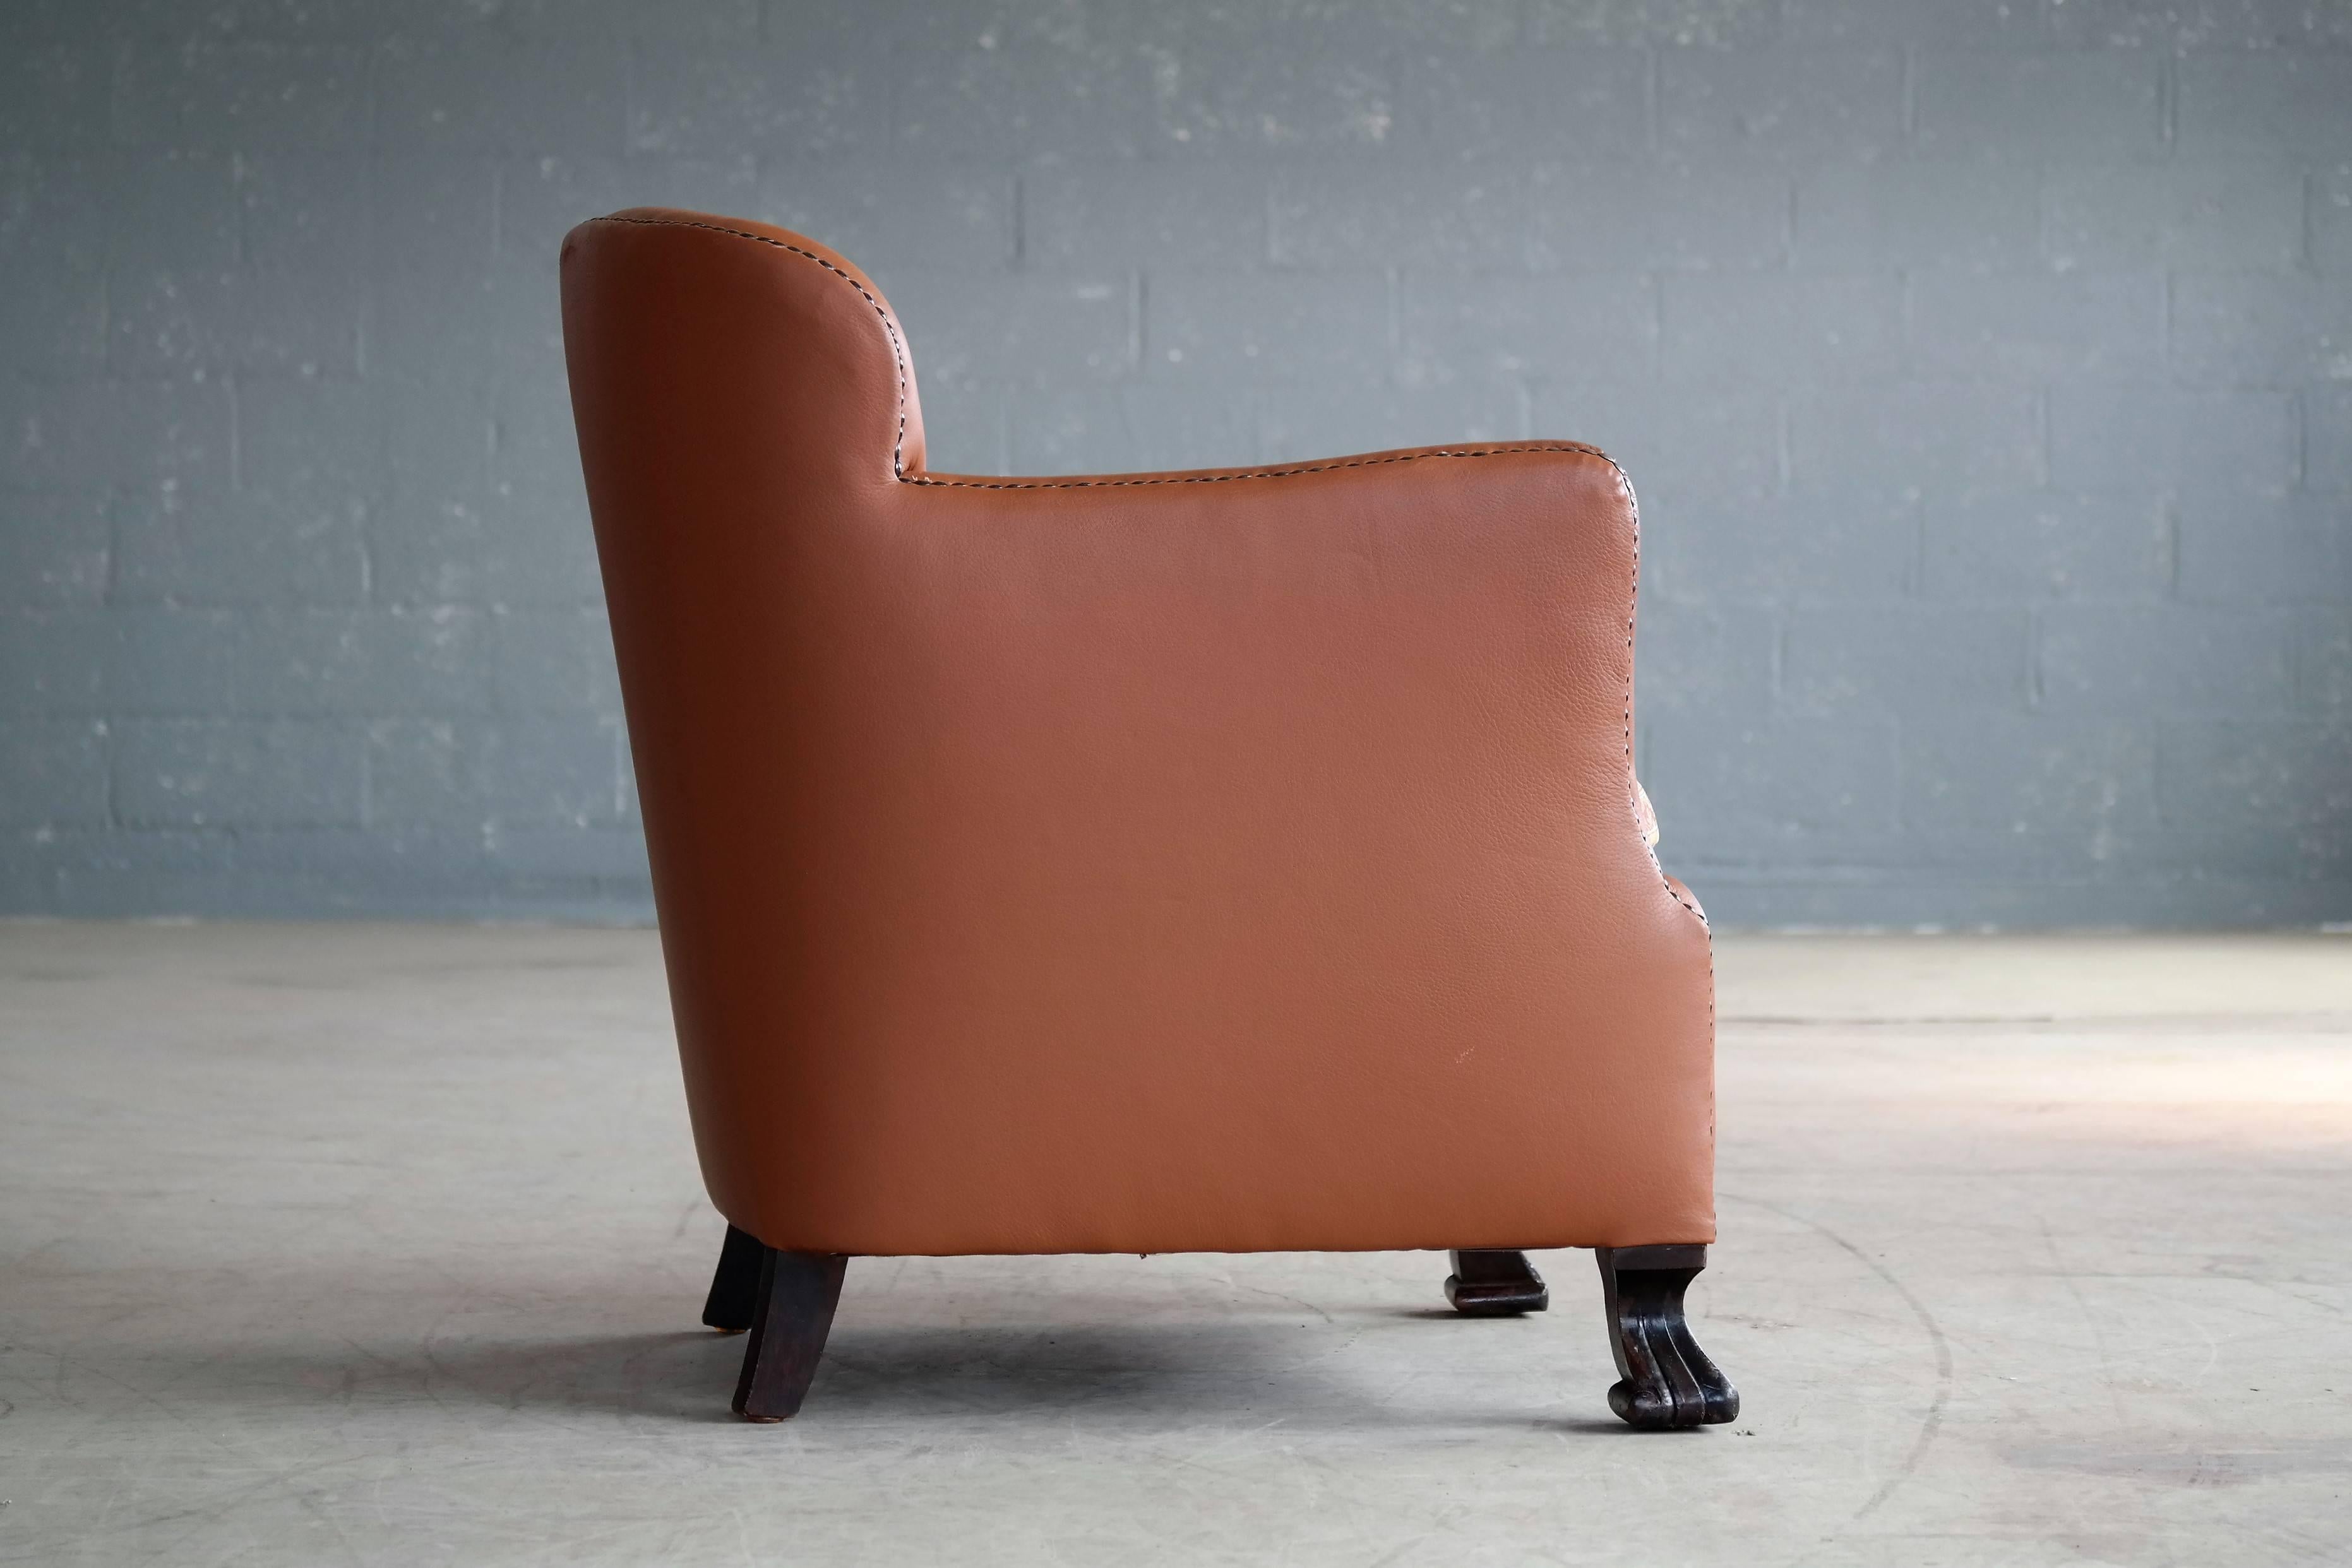 Danish, 1930s Half Size Club Chair in New Cognac Colored Leather and Brass Tacks 2